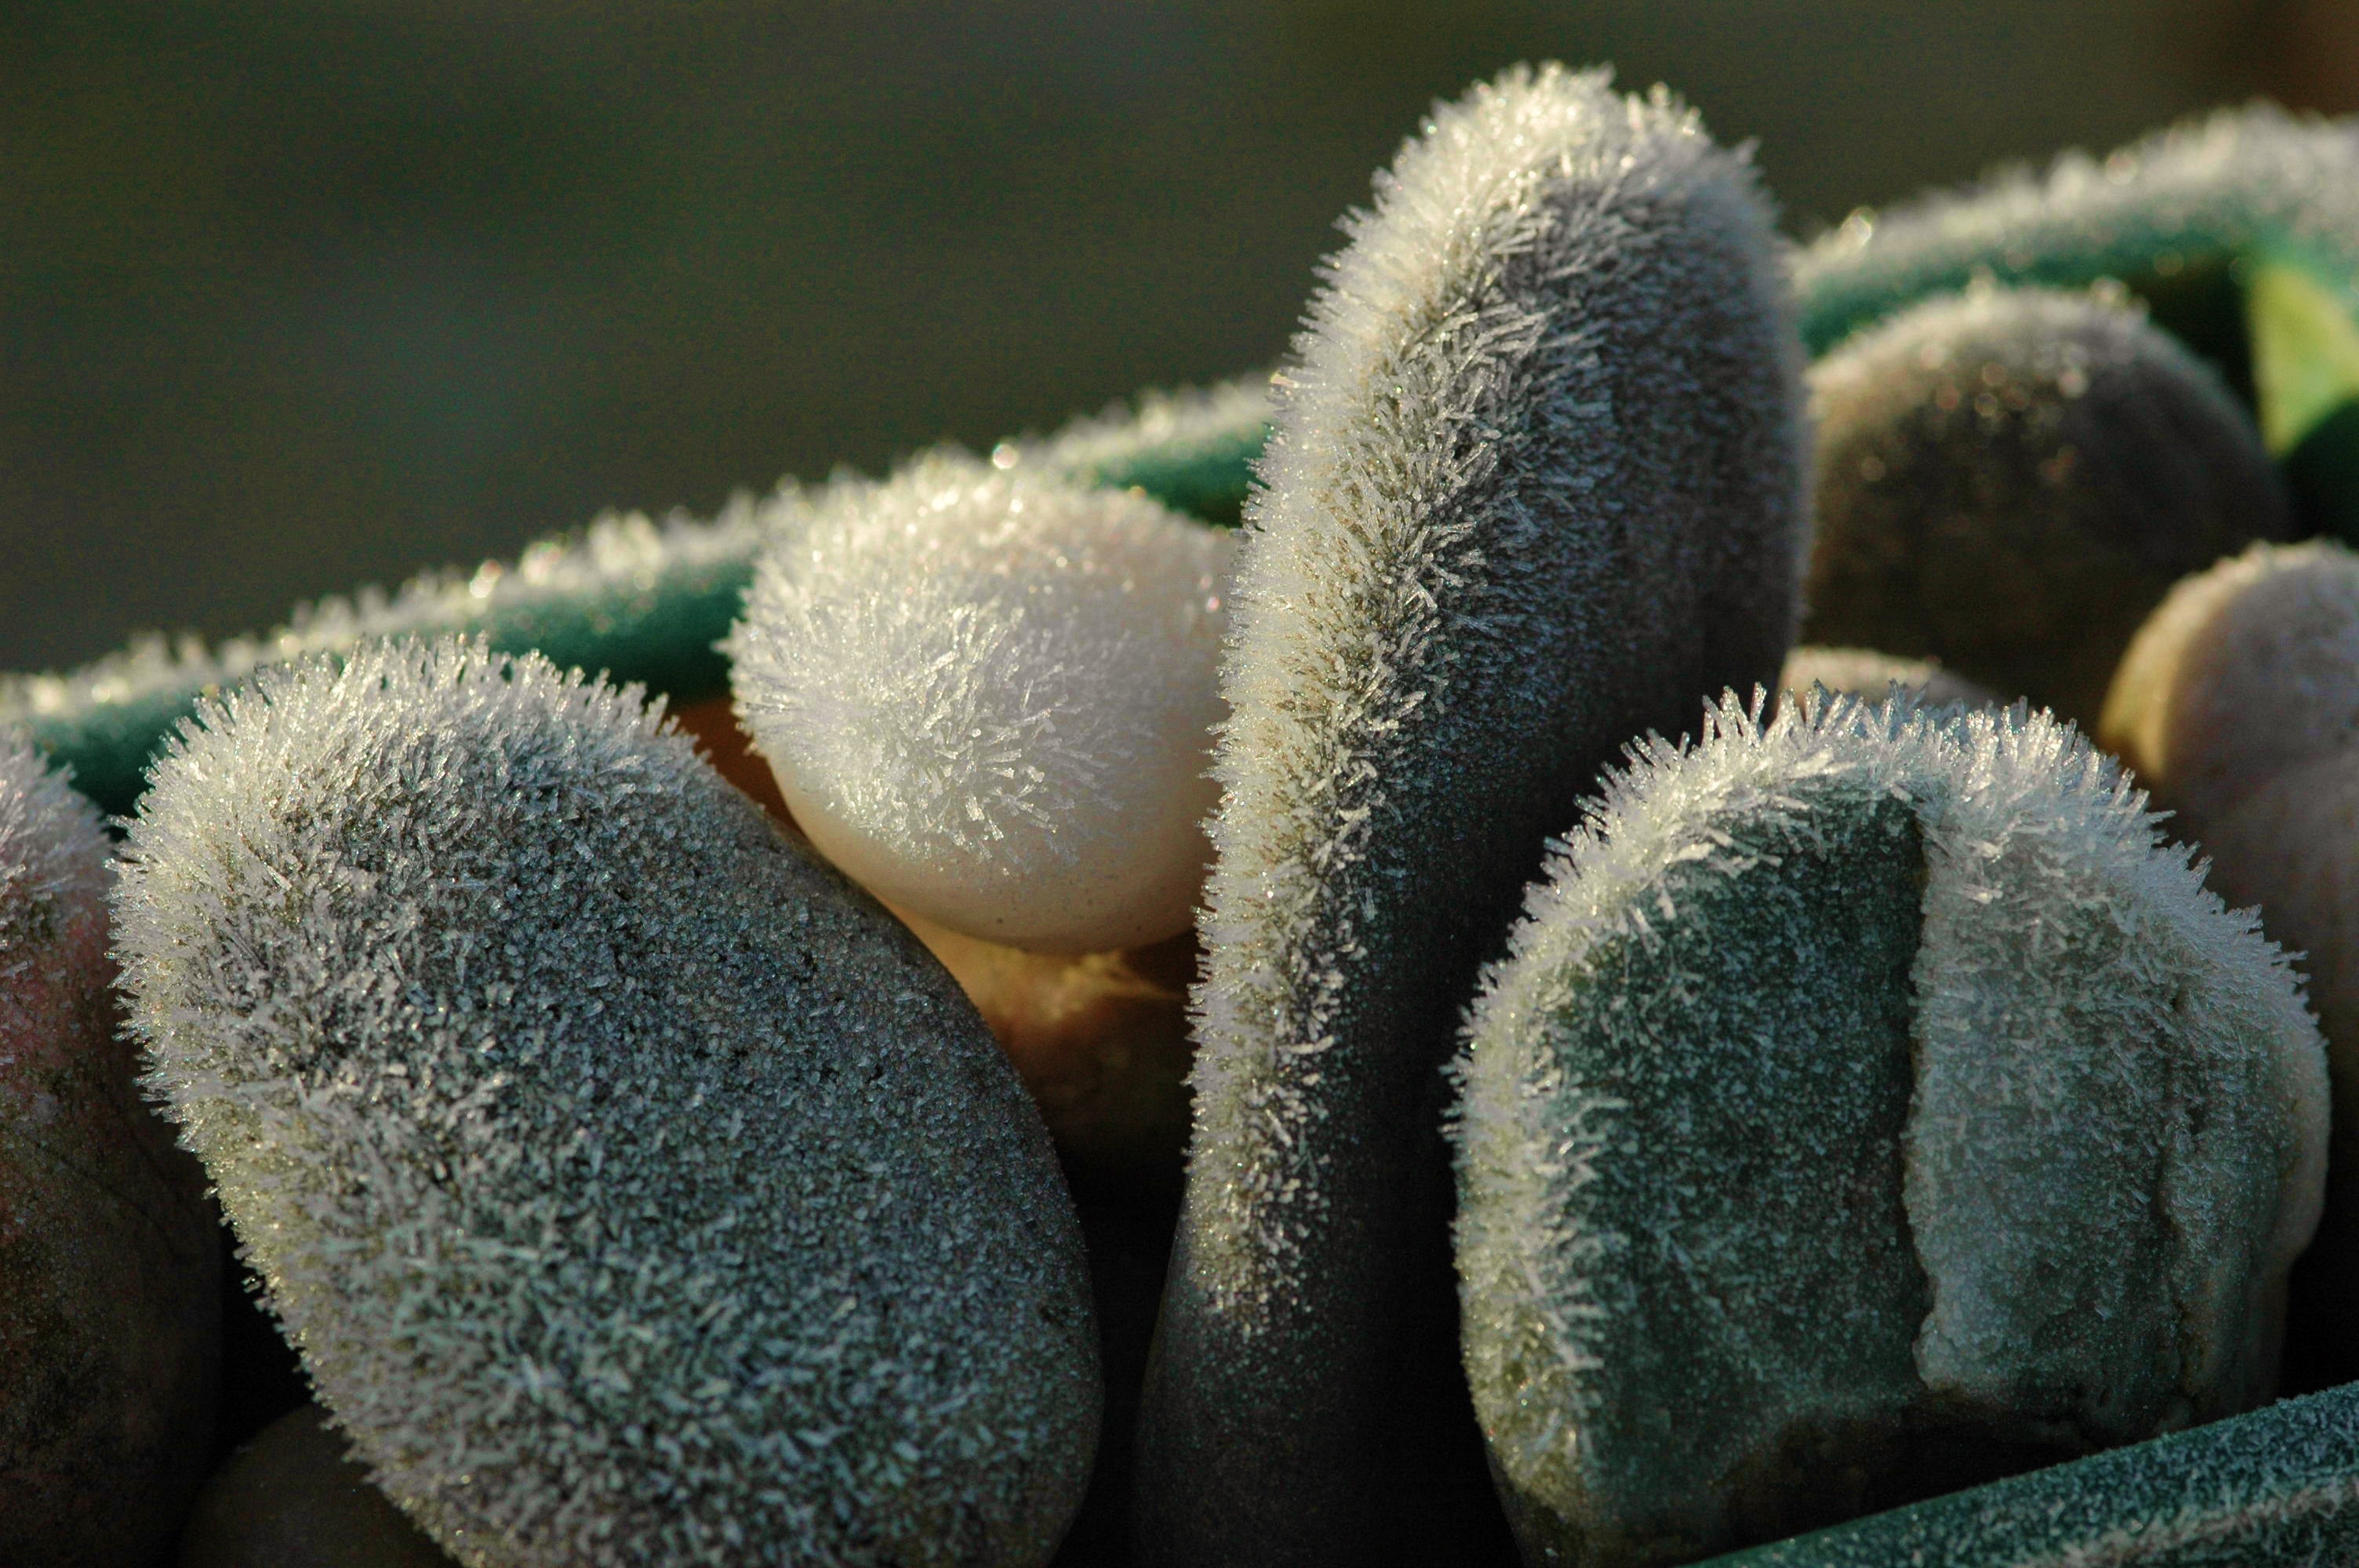 Pebble, Ice, Winter, Cold, Frost, close-up, no people